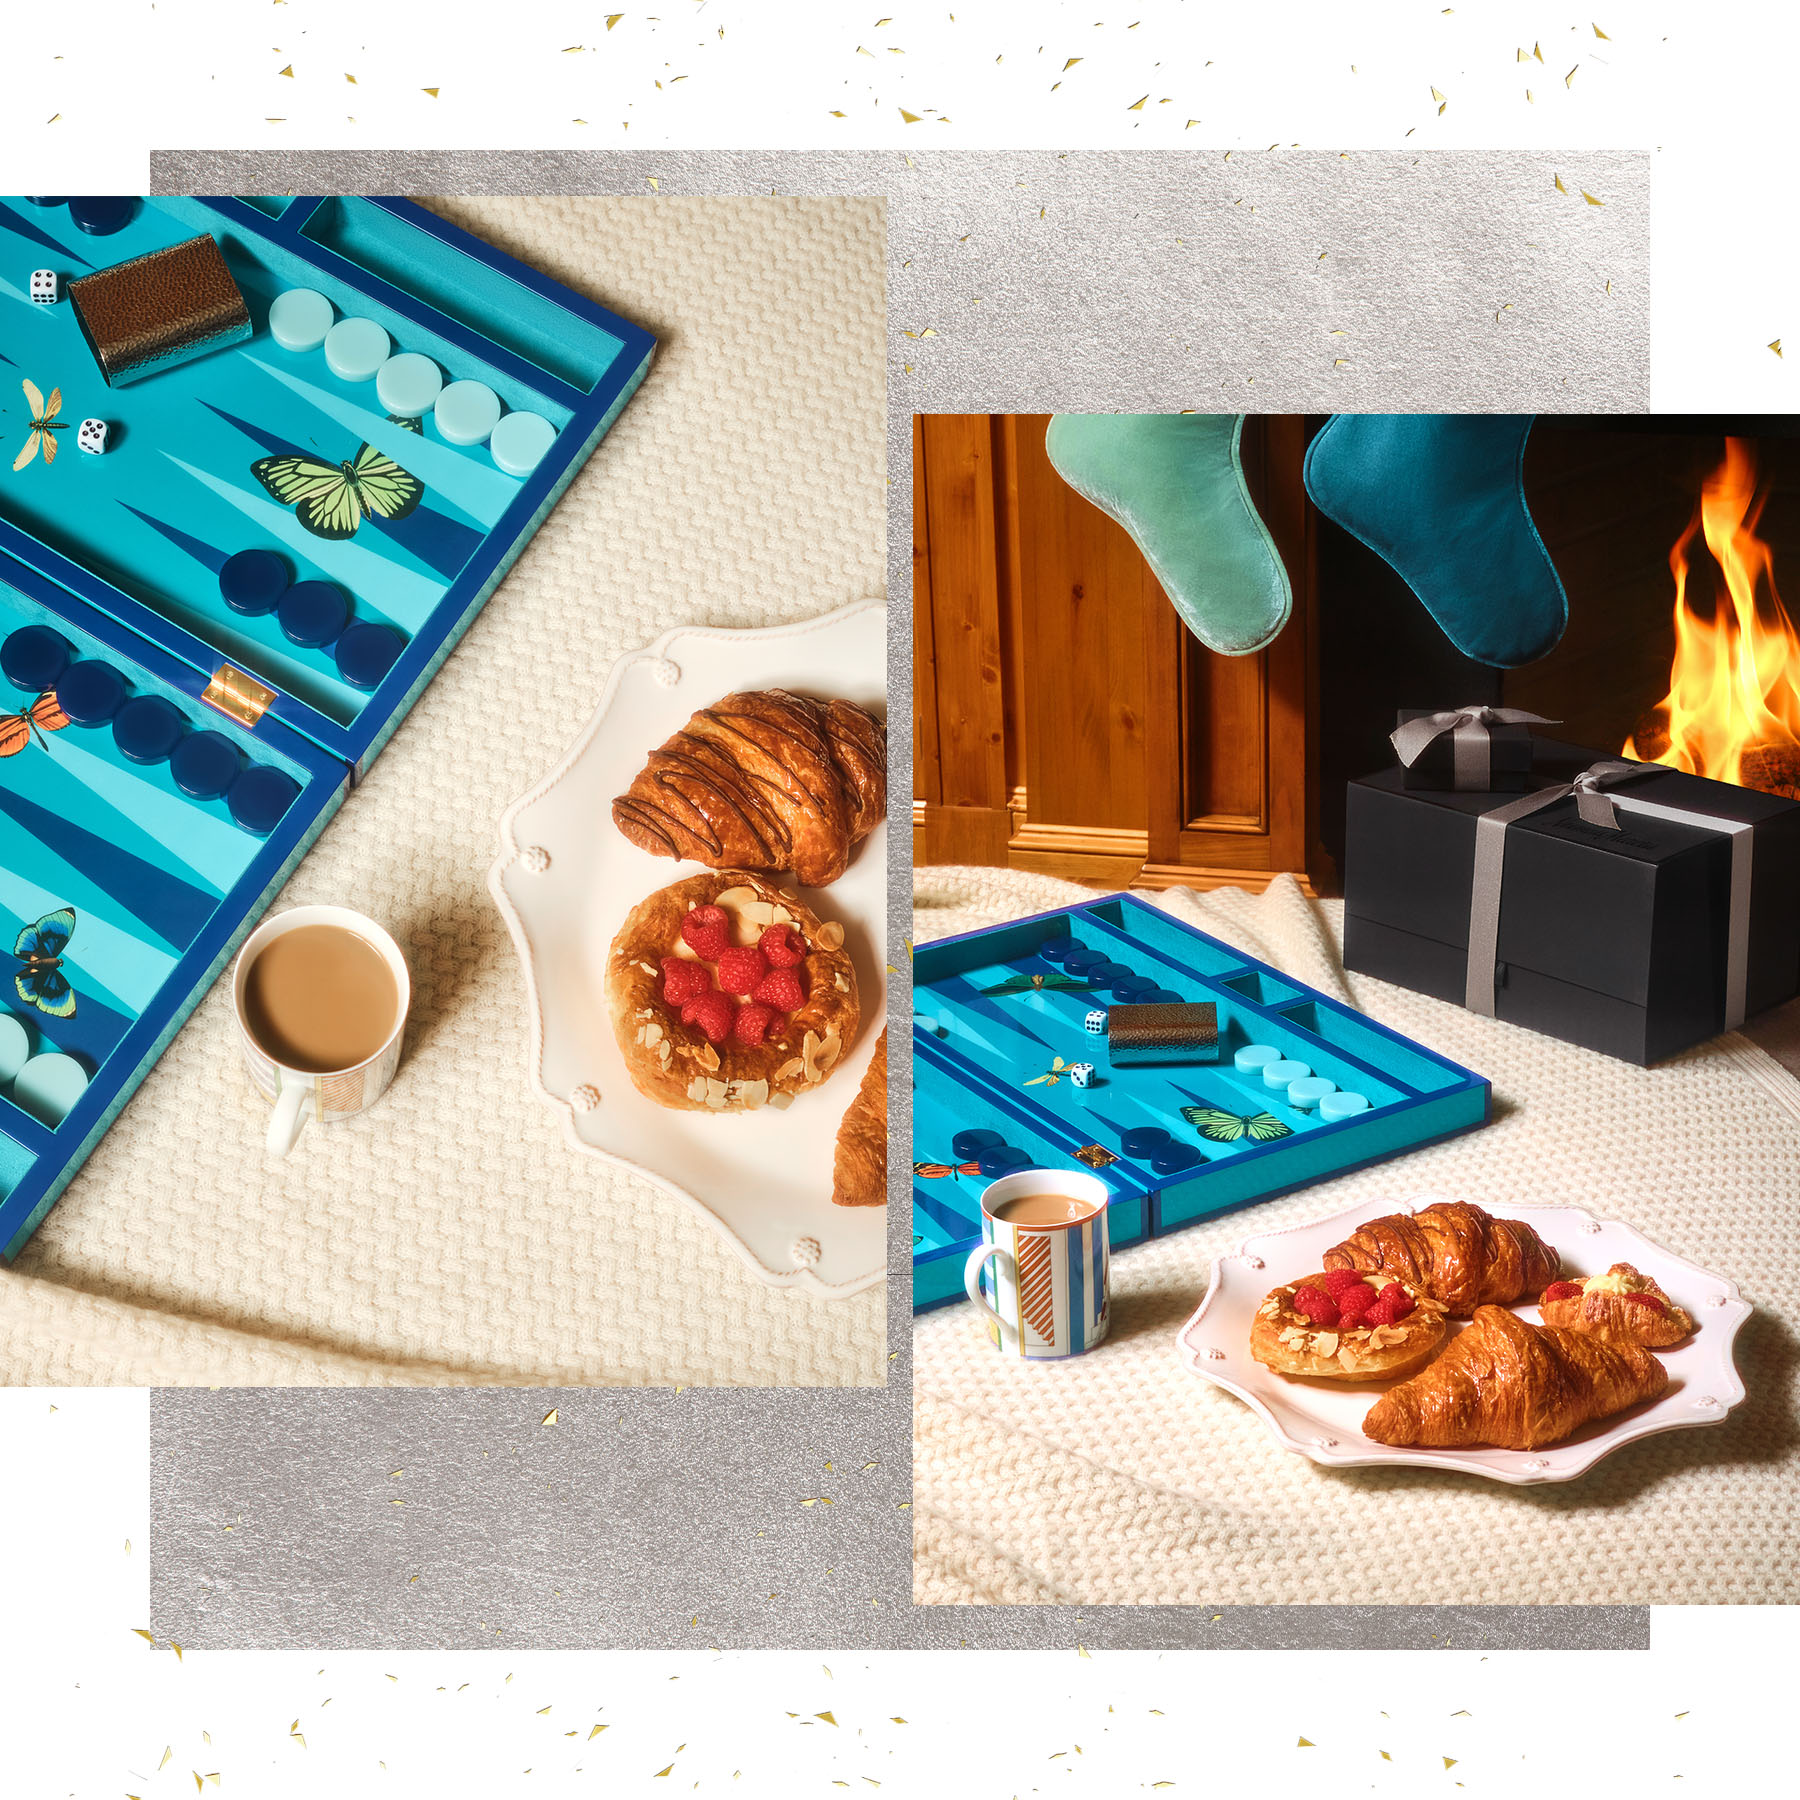 backgammon and pastries